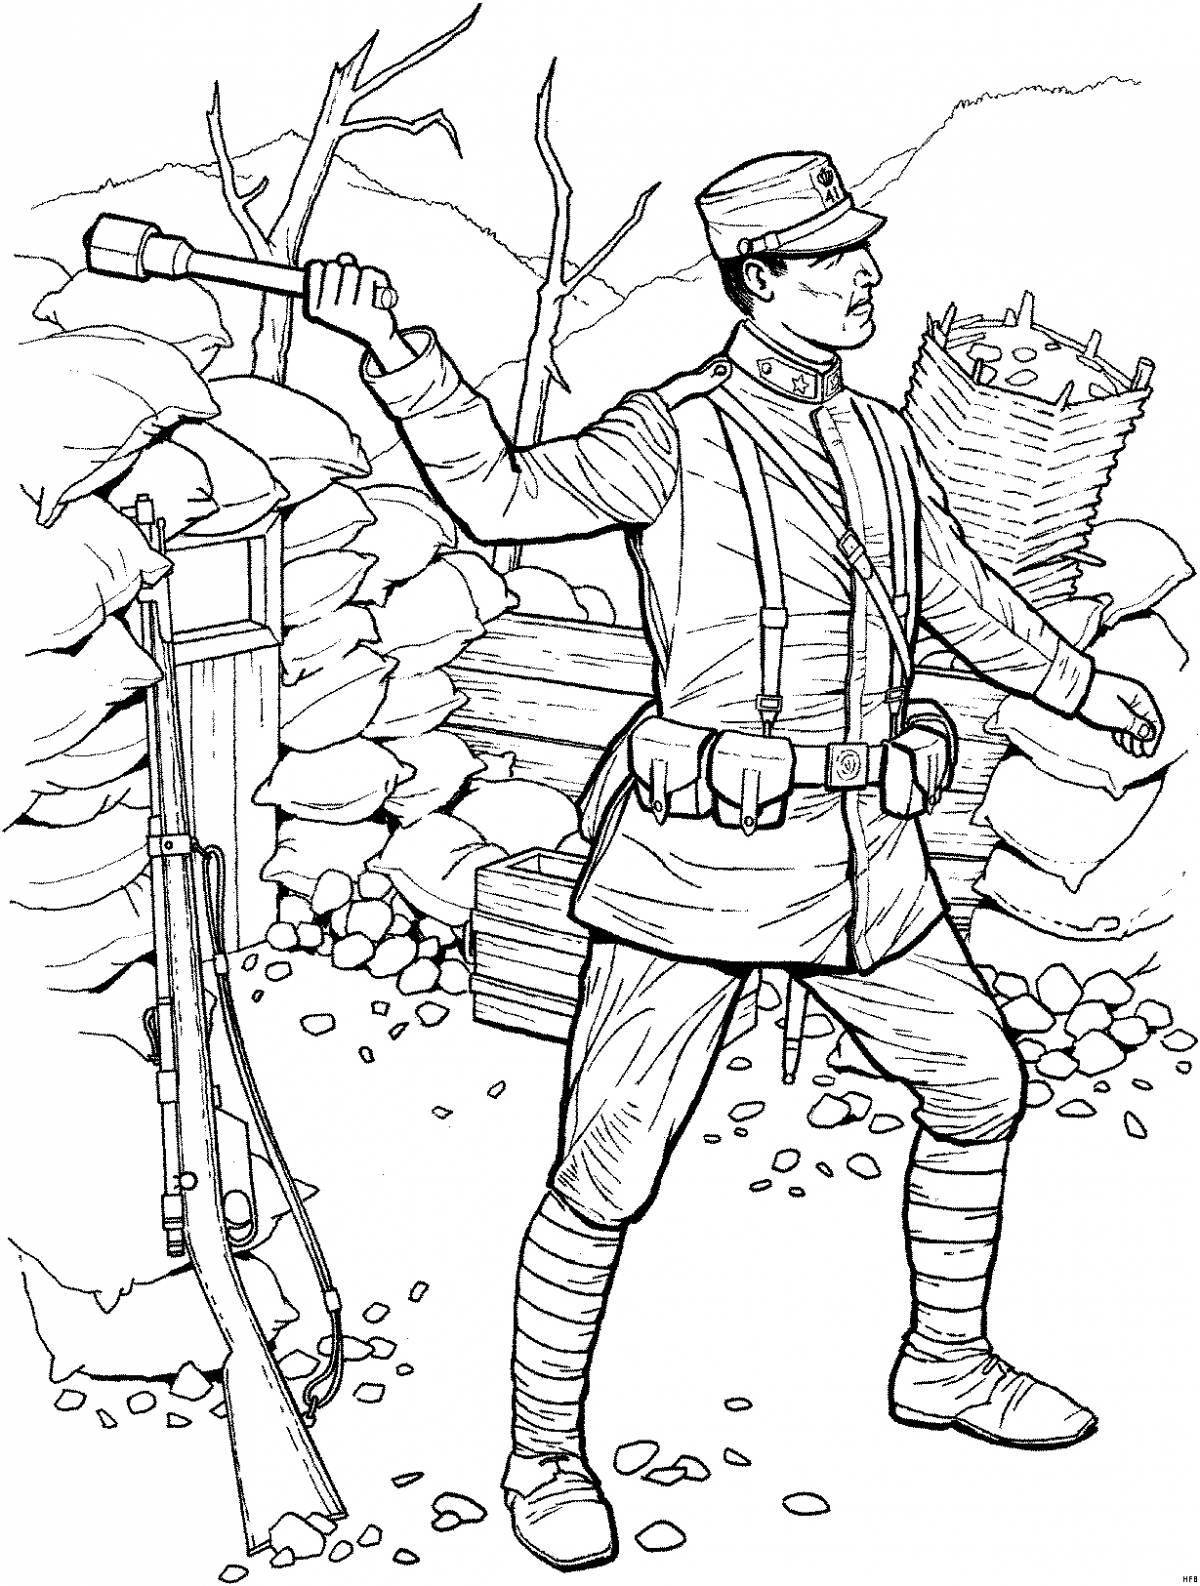 Coloring book brave soldiers in war